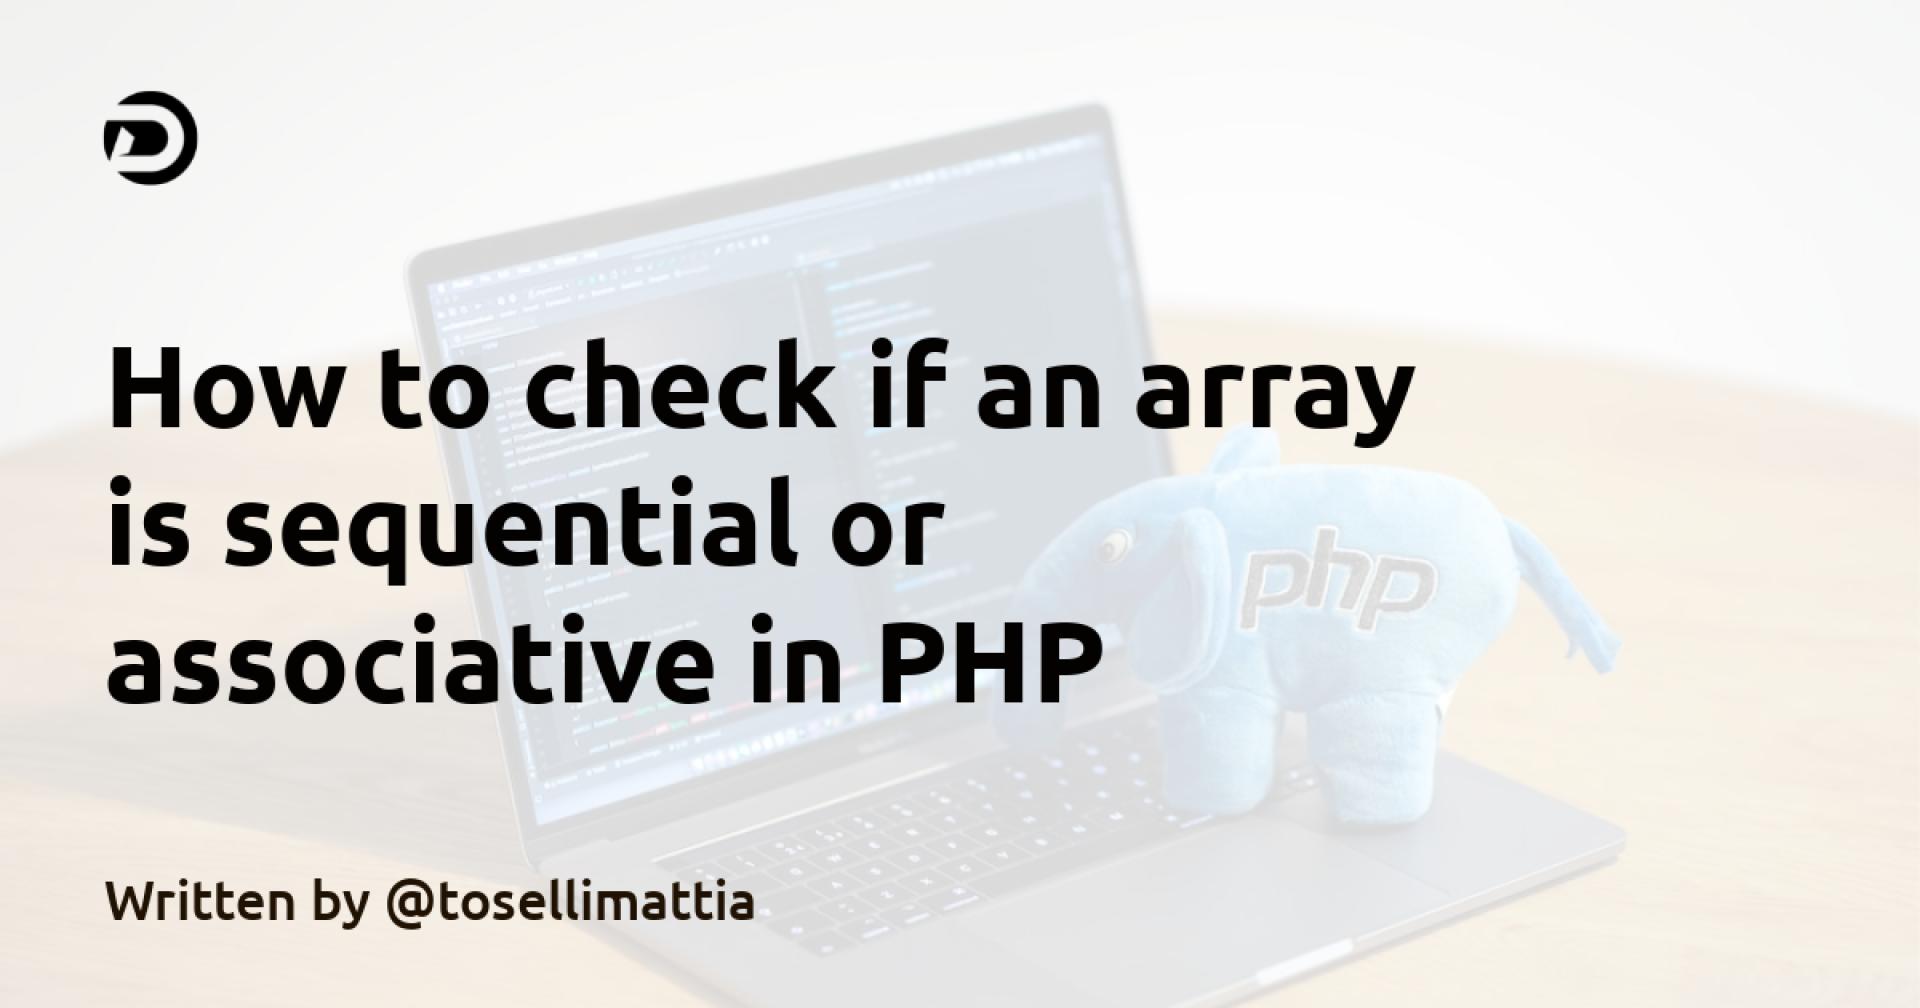 How to check if an array is sequential or associative in PHP